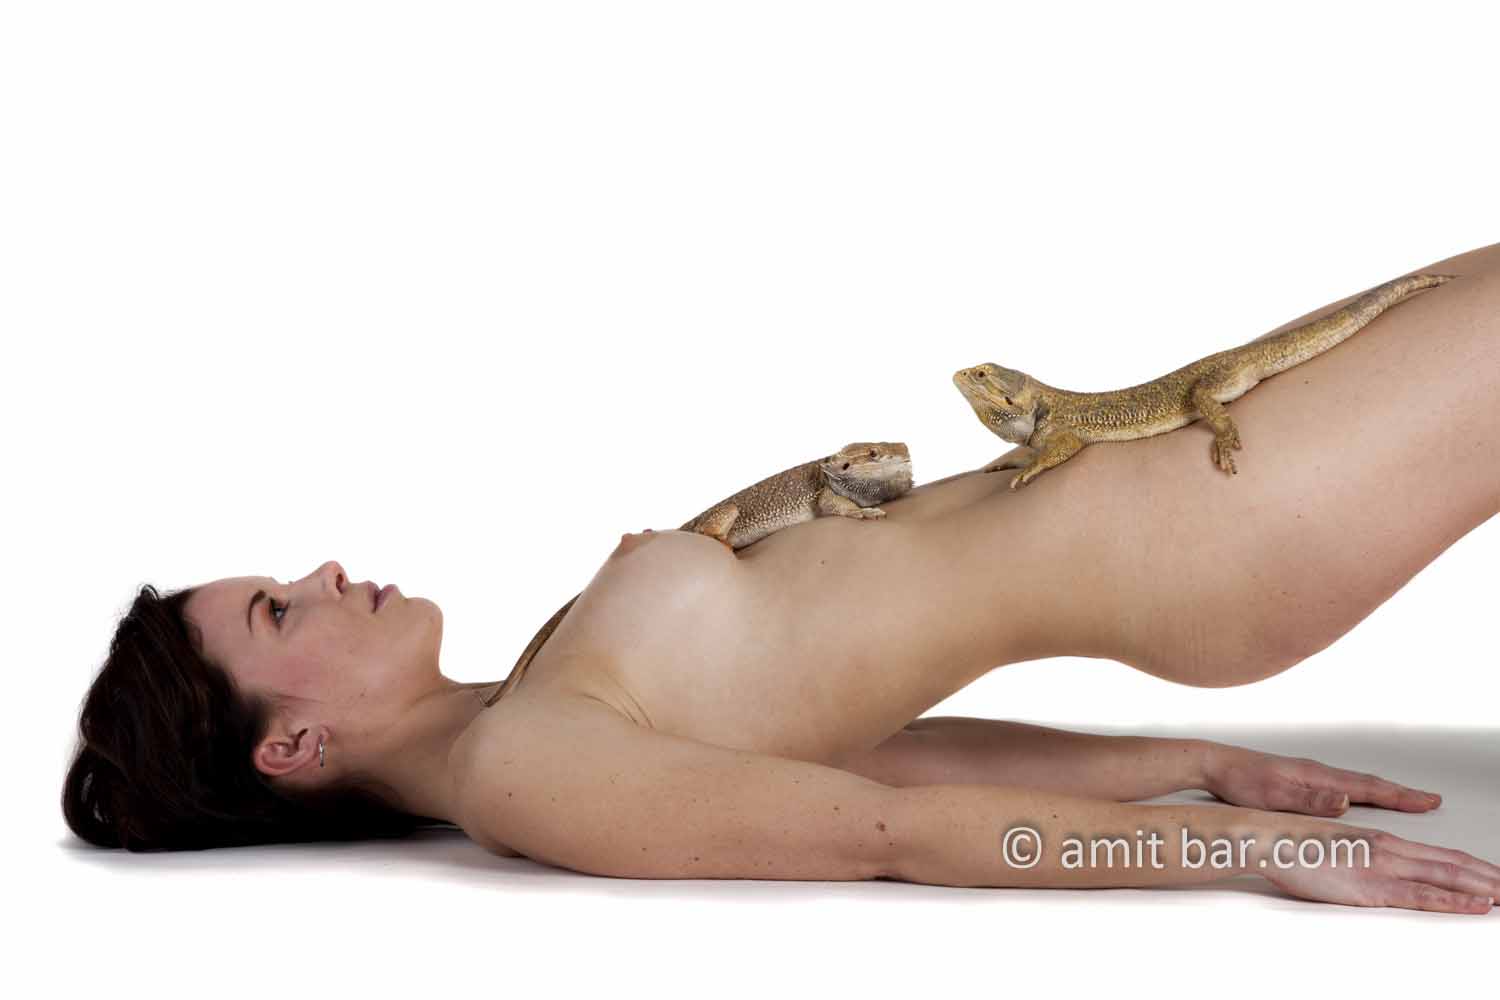 Crested gecko I: Crested geckos (New Caledonian crested gecko, Guichenot's giant gecko or eyelash gecko) on a nude model belly